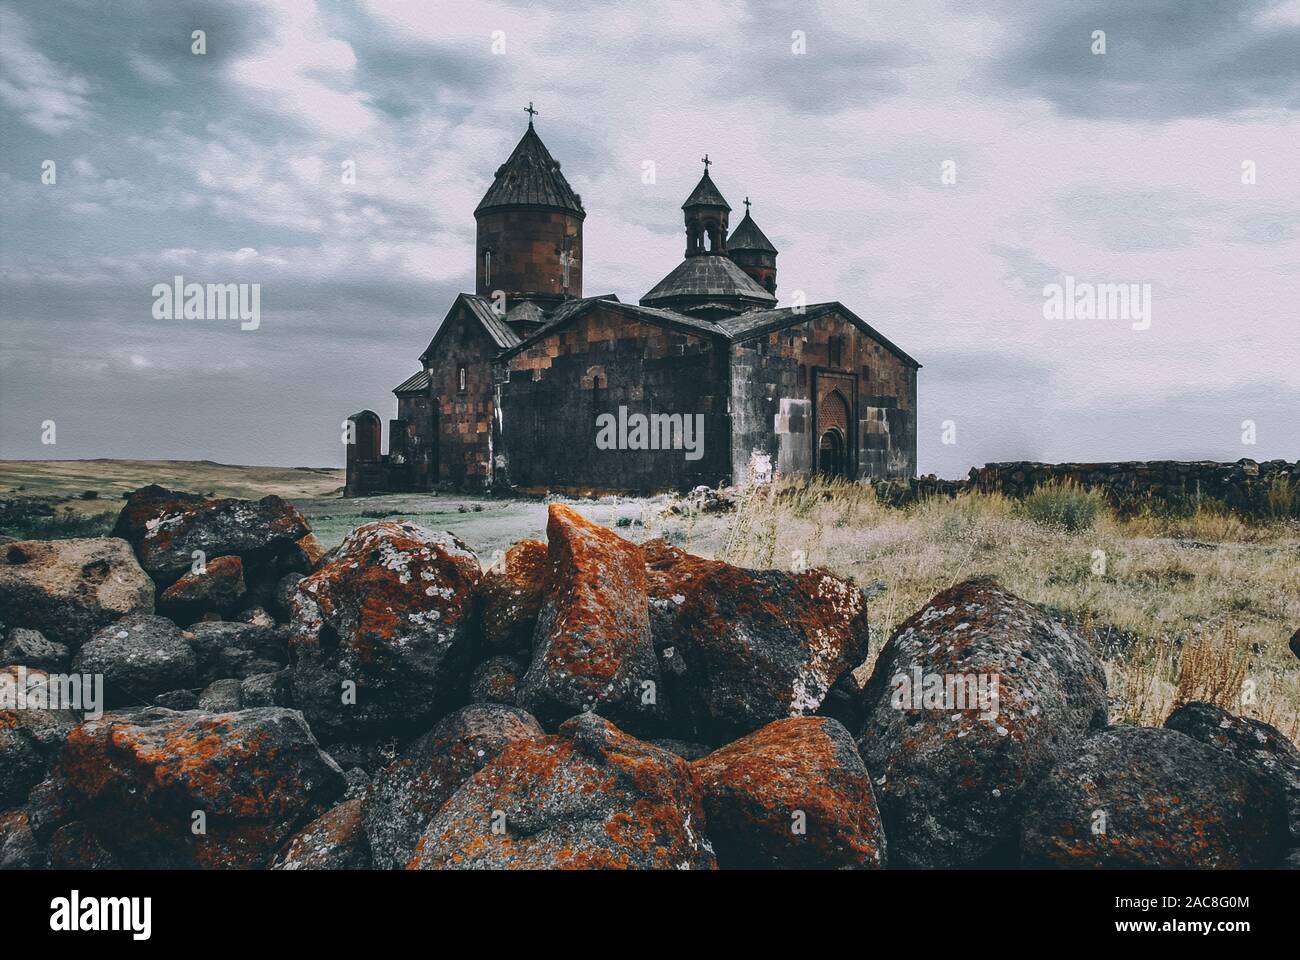 Saghmosavank (Monastery of Psalms)is a 13th-century monastic complex located in the village of Saghmosavan in the Aragatsotn Province of Armenia Stock Photo